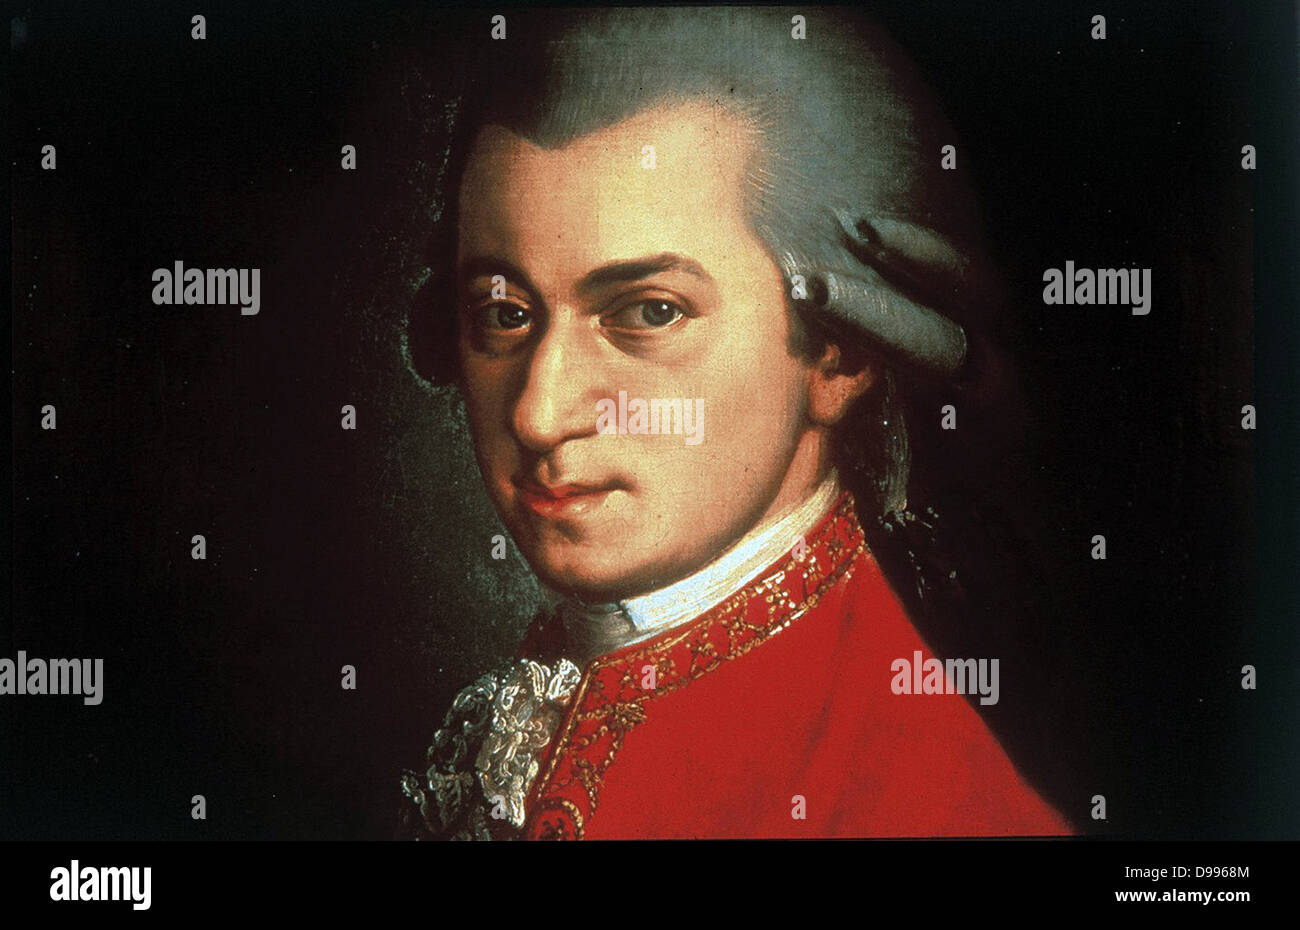 Portrait of Wolfgang Amadeus Mozart circa 1780 painted by Johann Nepomuk della Croce. Wolfgang Amadeus Mozart (27 January 1756 – 5 December 1791), prolific and influential Austrian composer of the Classical era. Stock Photo